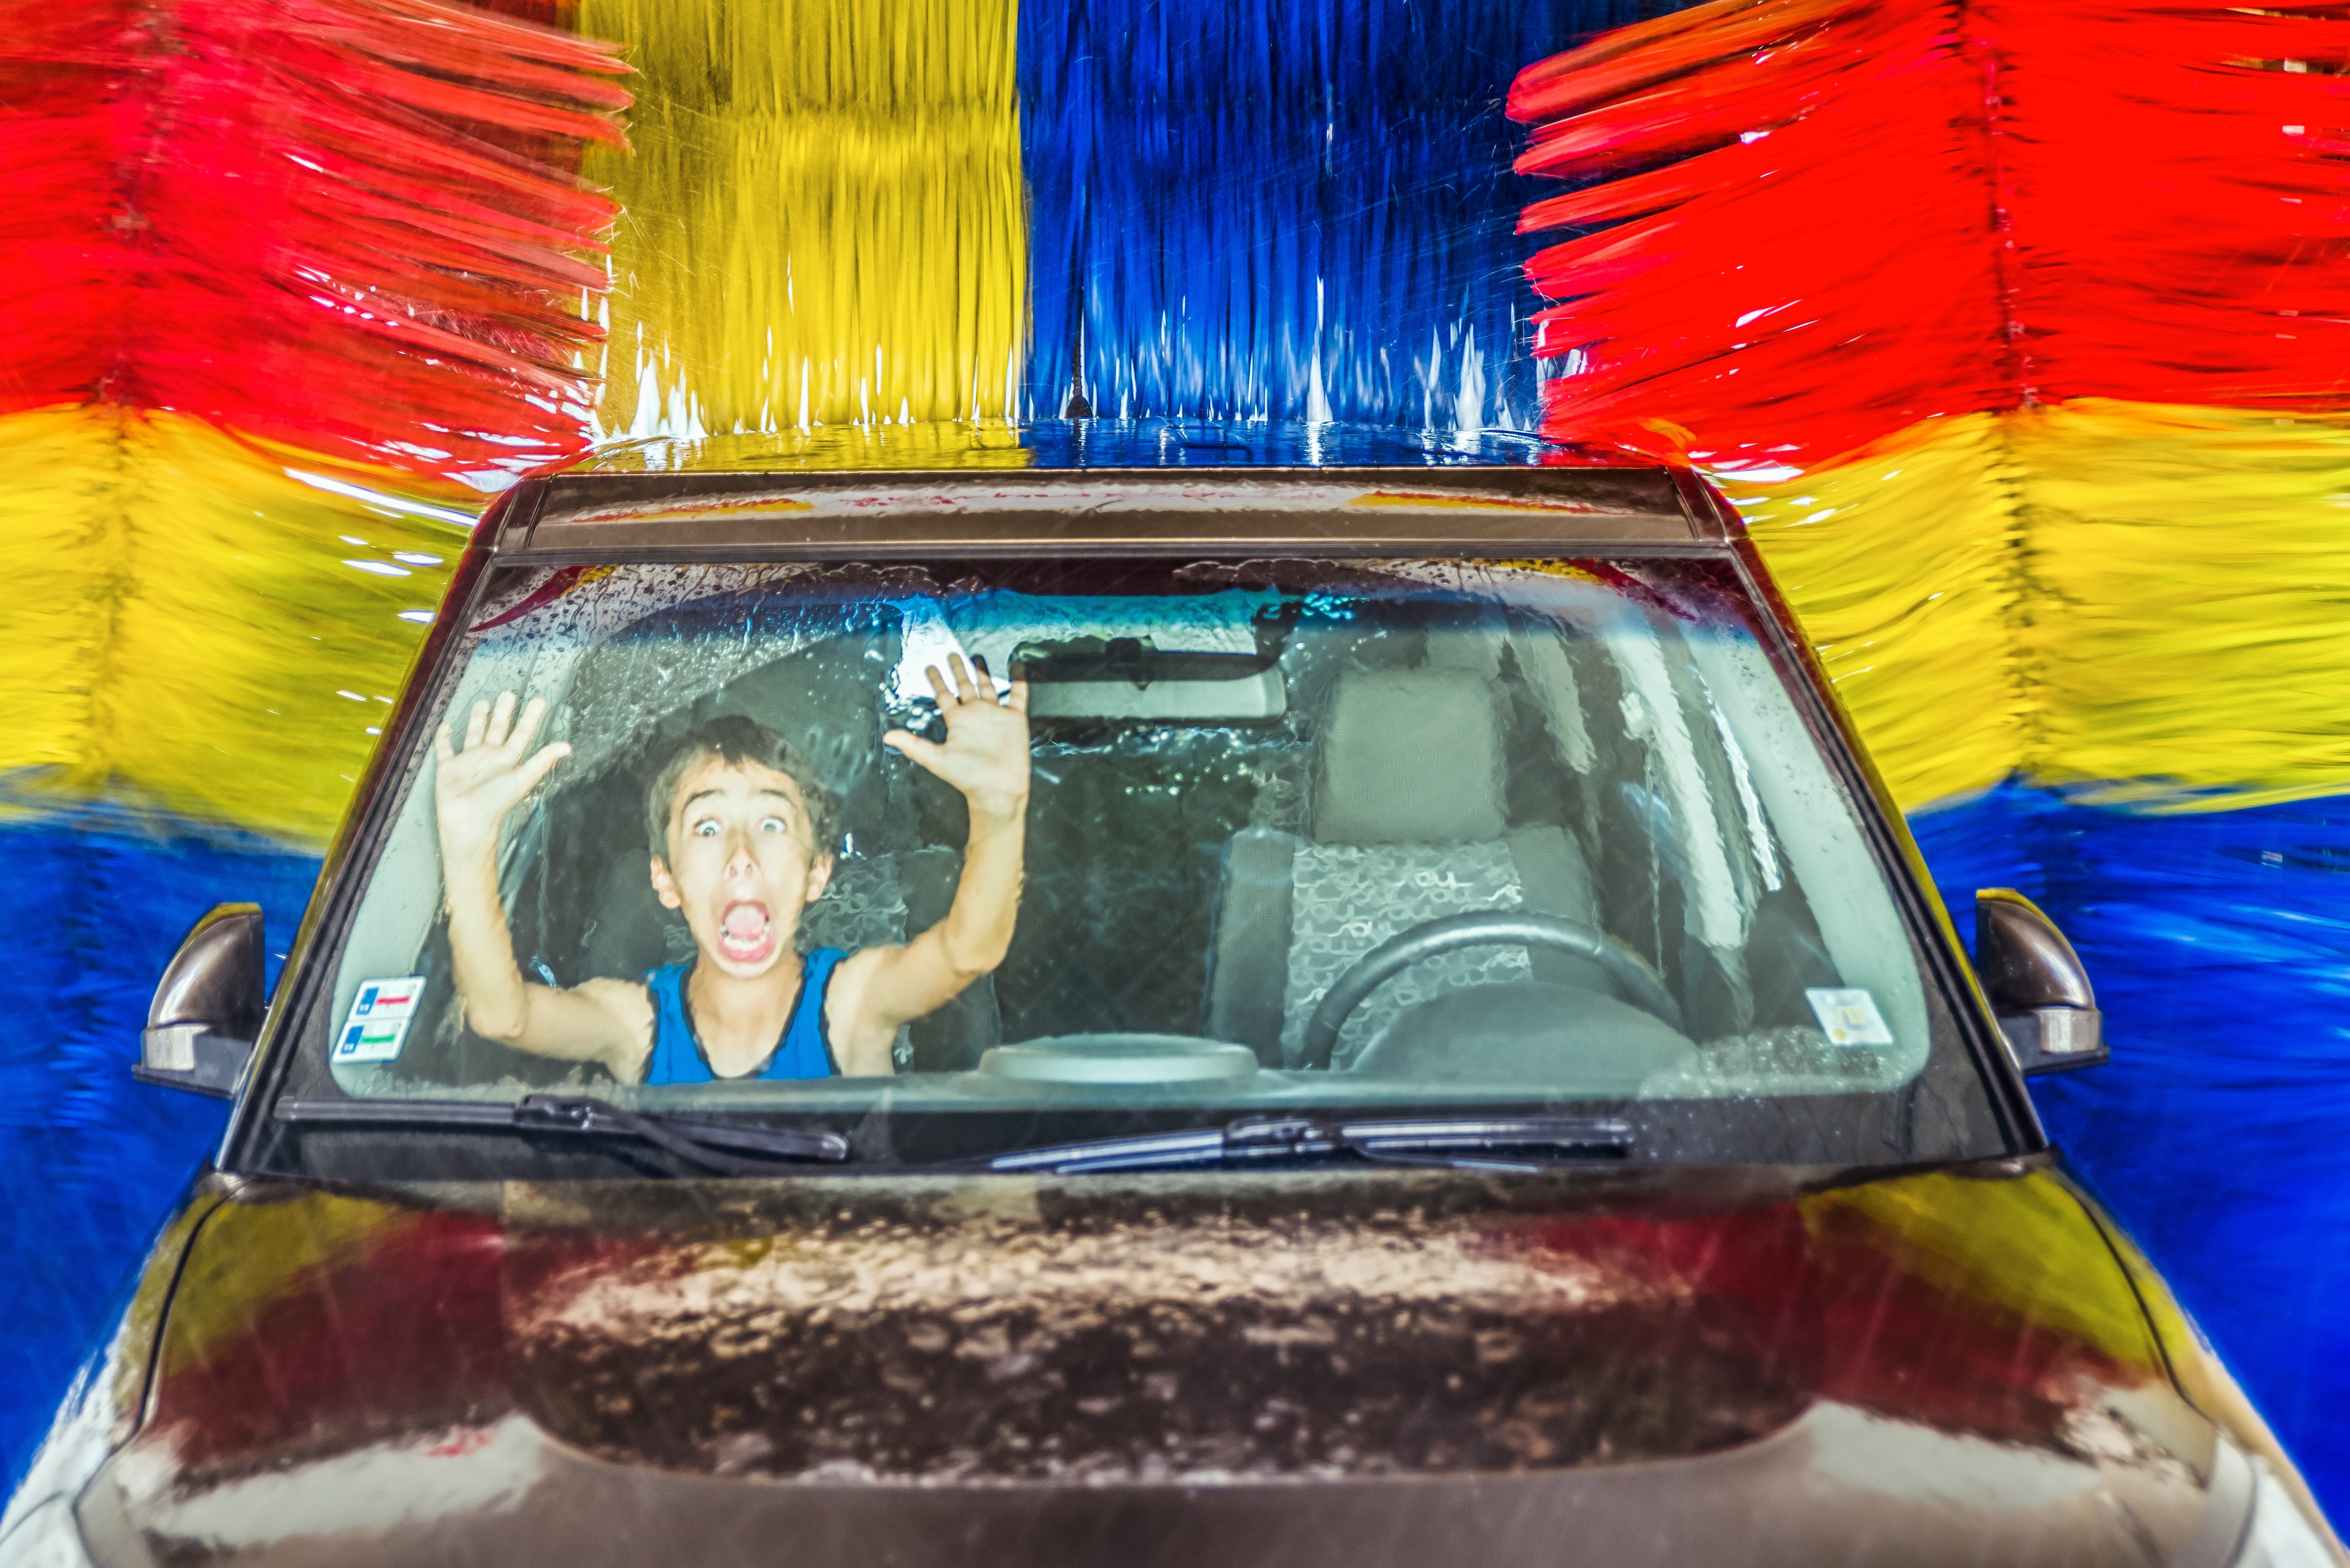 Boy in car going through the automatic car wash. | Source: Shutterstock